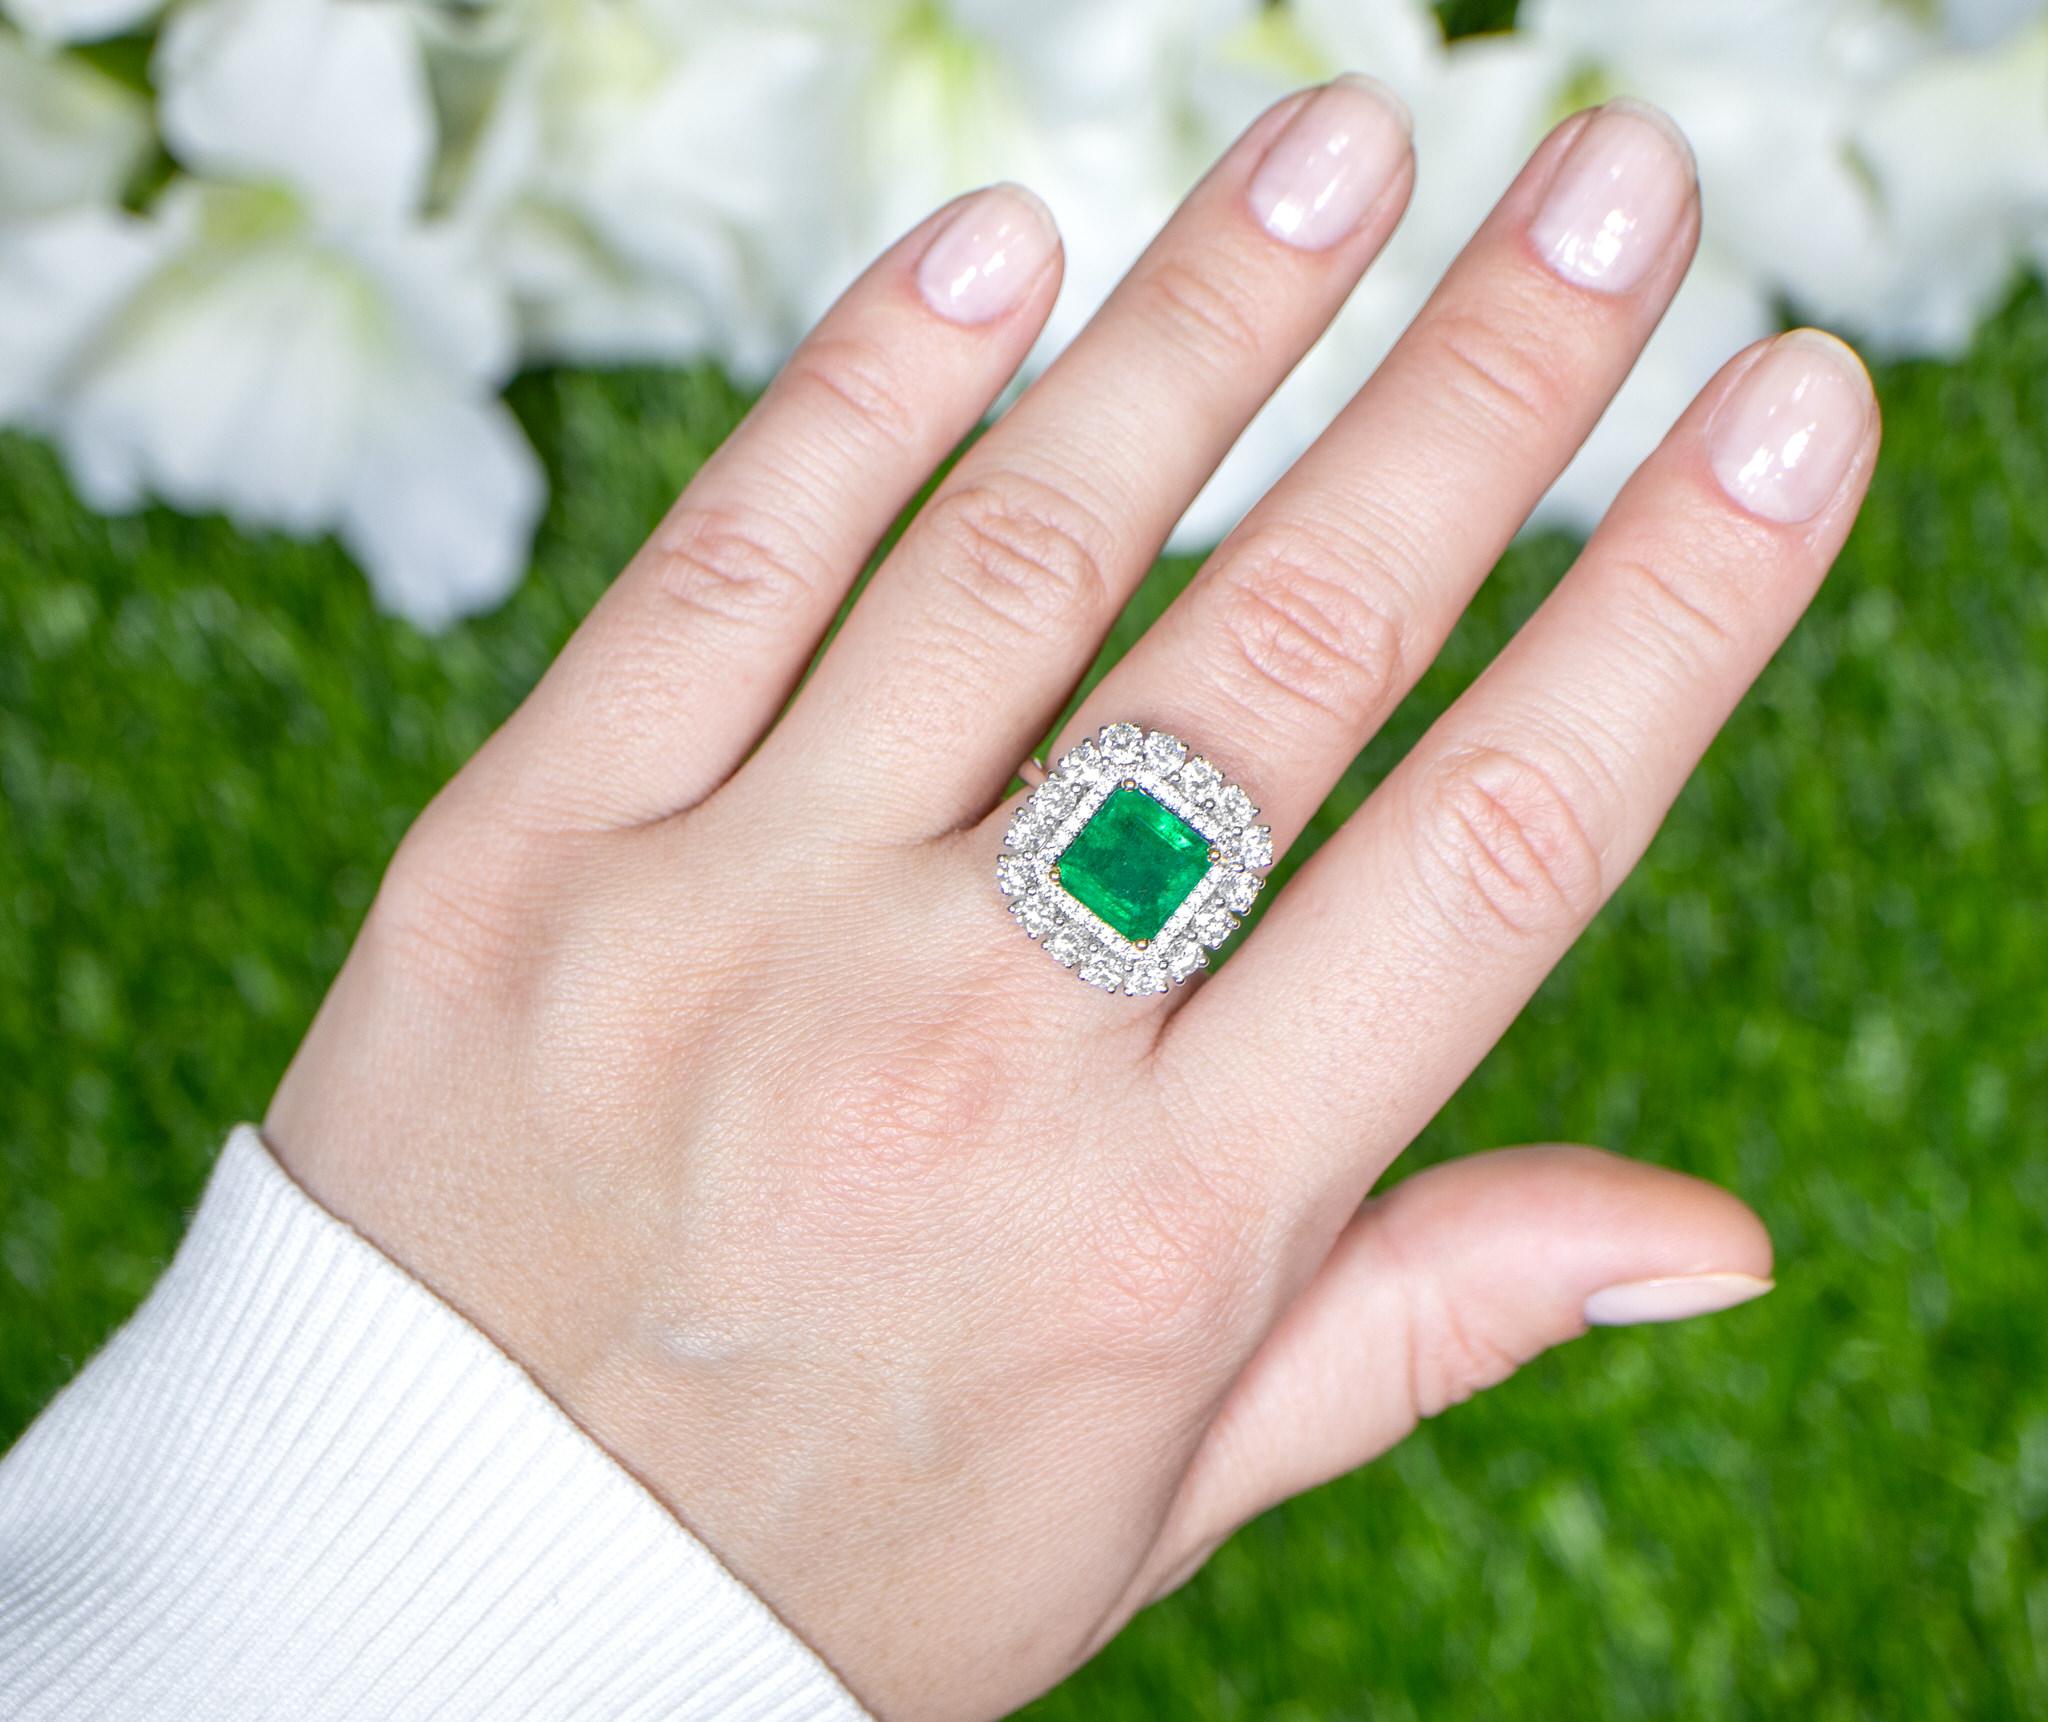 It comes with the Gemological Appraisal by GIA GG/AJP
All Gemstones are Natural
Emerald = 3.39 Carat
Diamonds = 2.23 Carats
Metal: 18K Gold
Ring Size: 6.75* US
*It can be resized complimentary